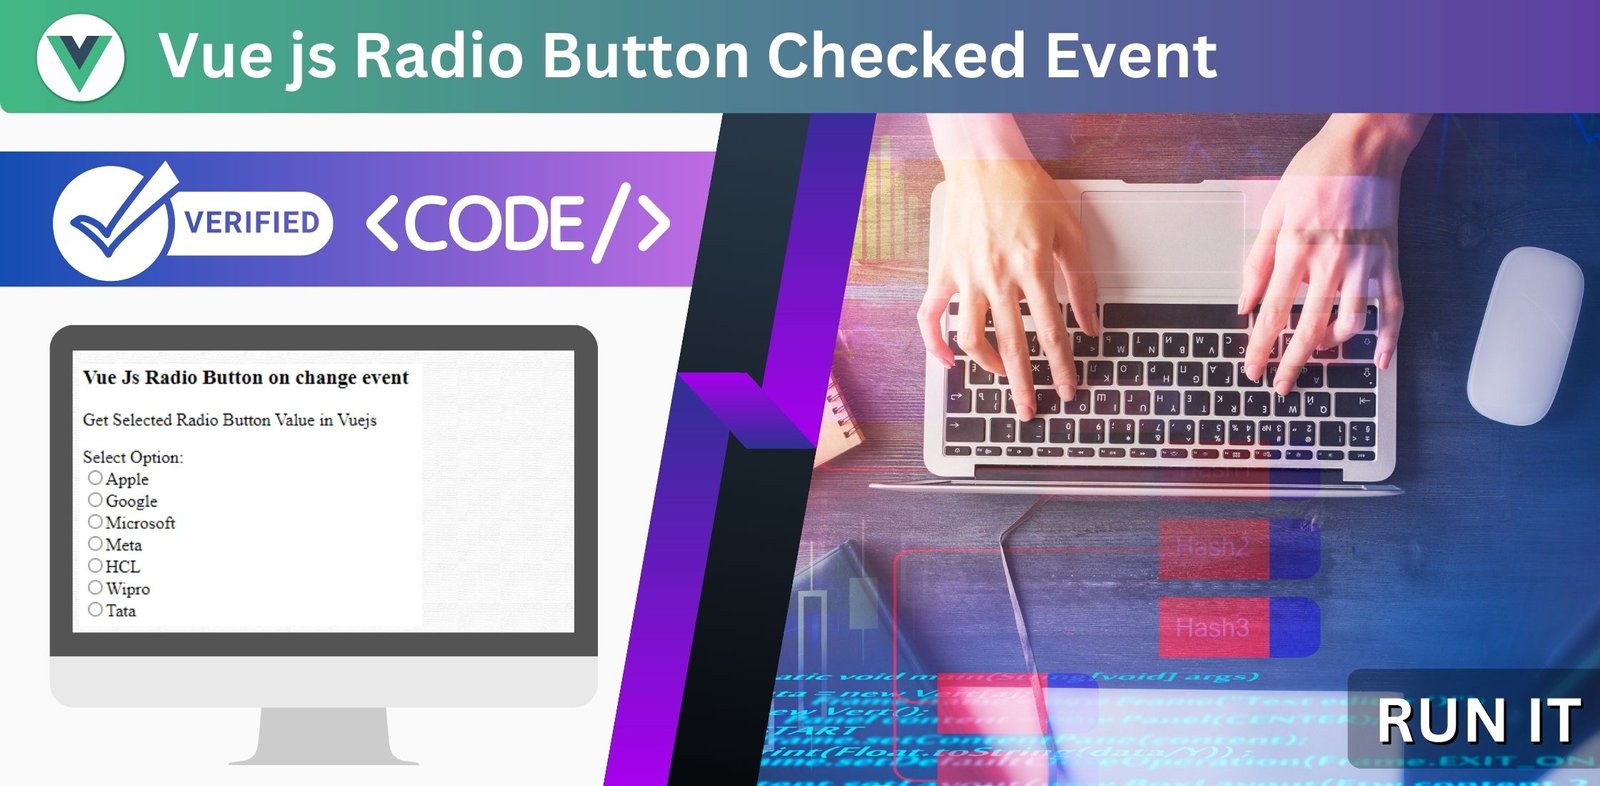 Vue js Radio Button Checked Event